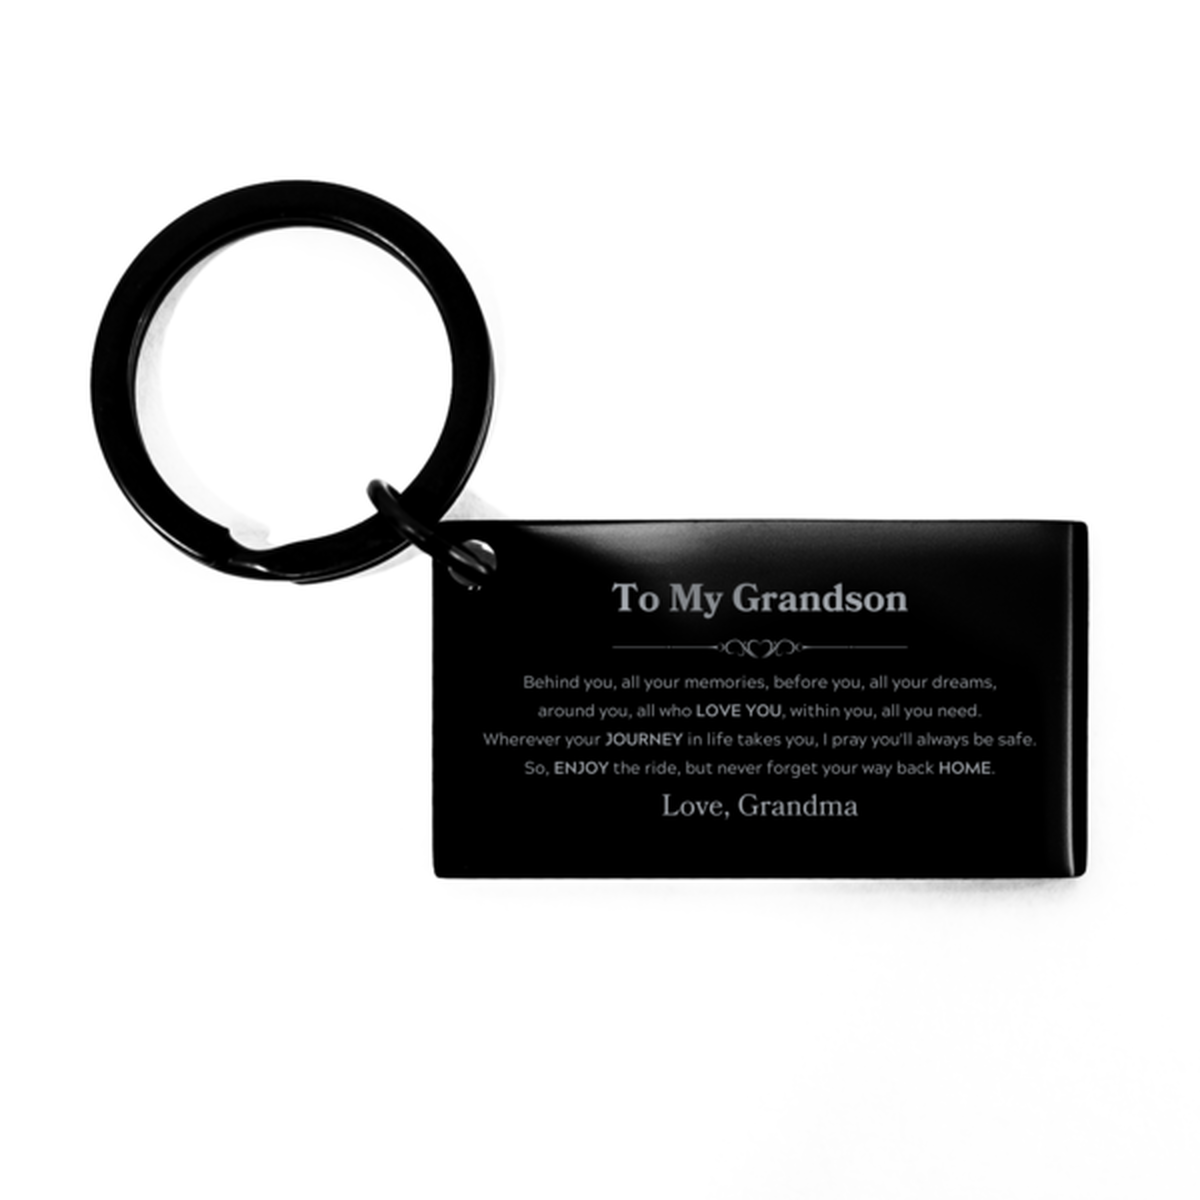 To My Grandson Graduation Gifts from Grandma, Grandson Keychain Christmas Birthday Gifts for Grandson Behind you, all your memories, before you, all your dreams. Love, Grandma